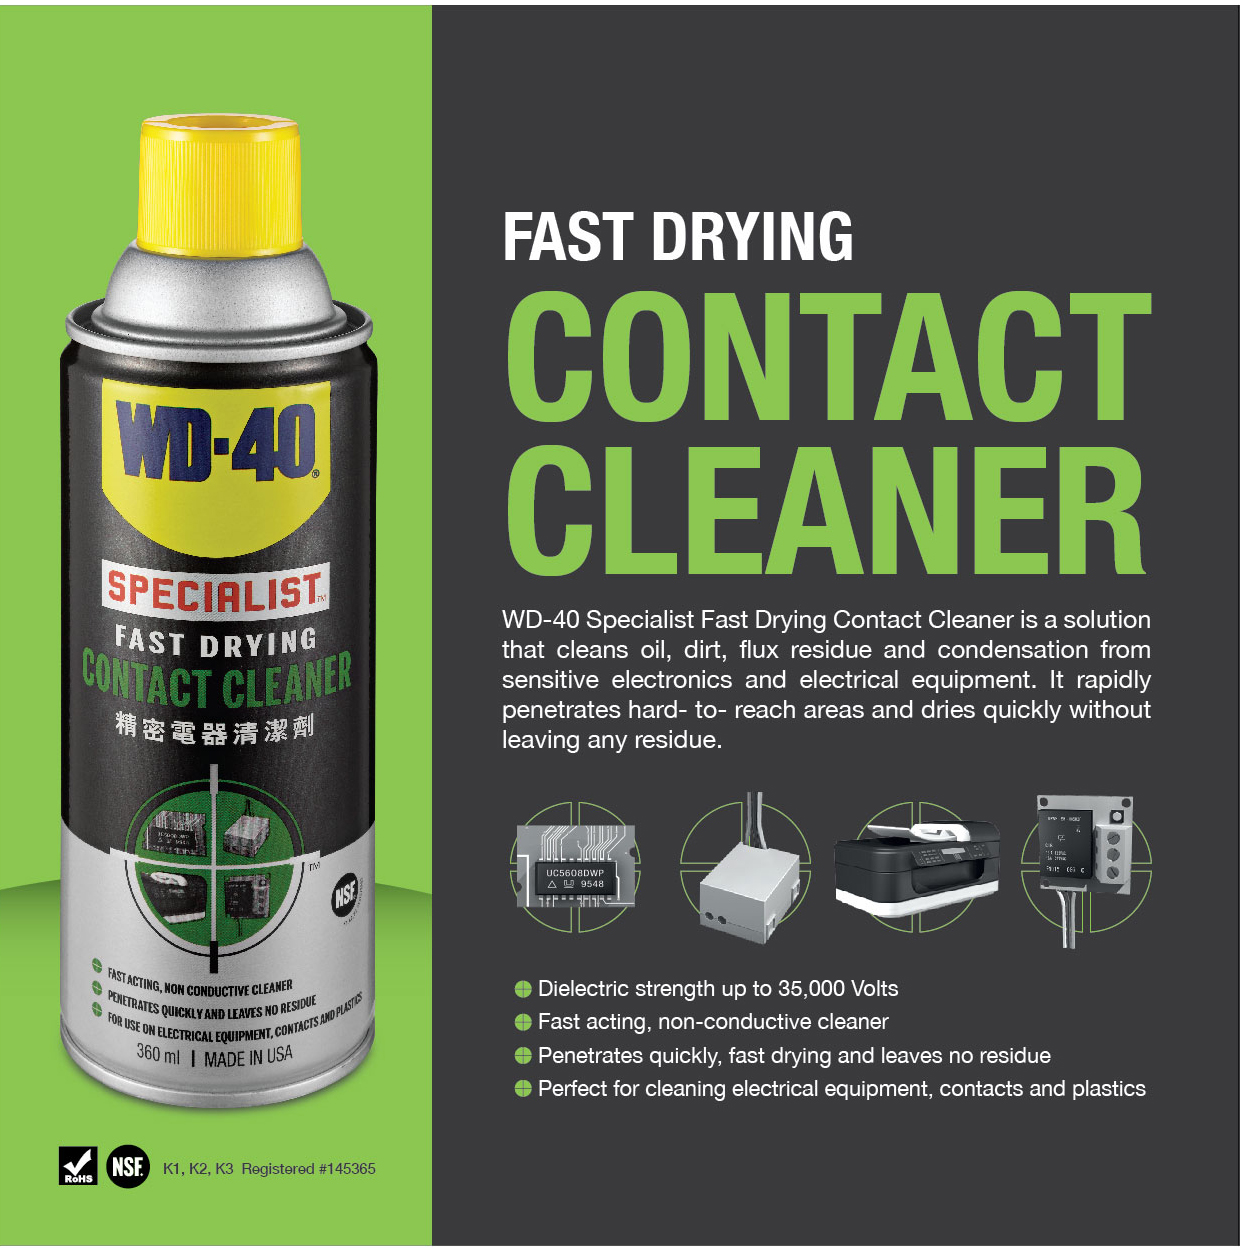 Contact clean. Contact Cleaner состав. Fusion Electronics Cleaner. Electric fast Dry.